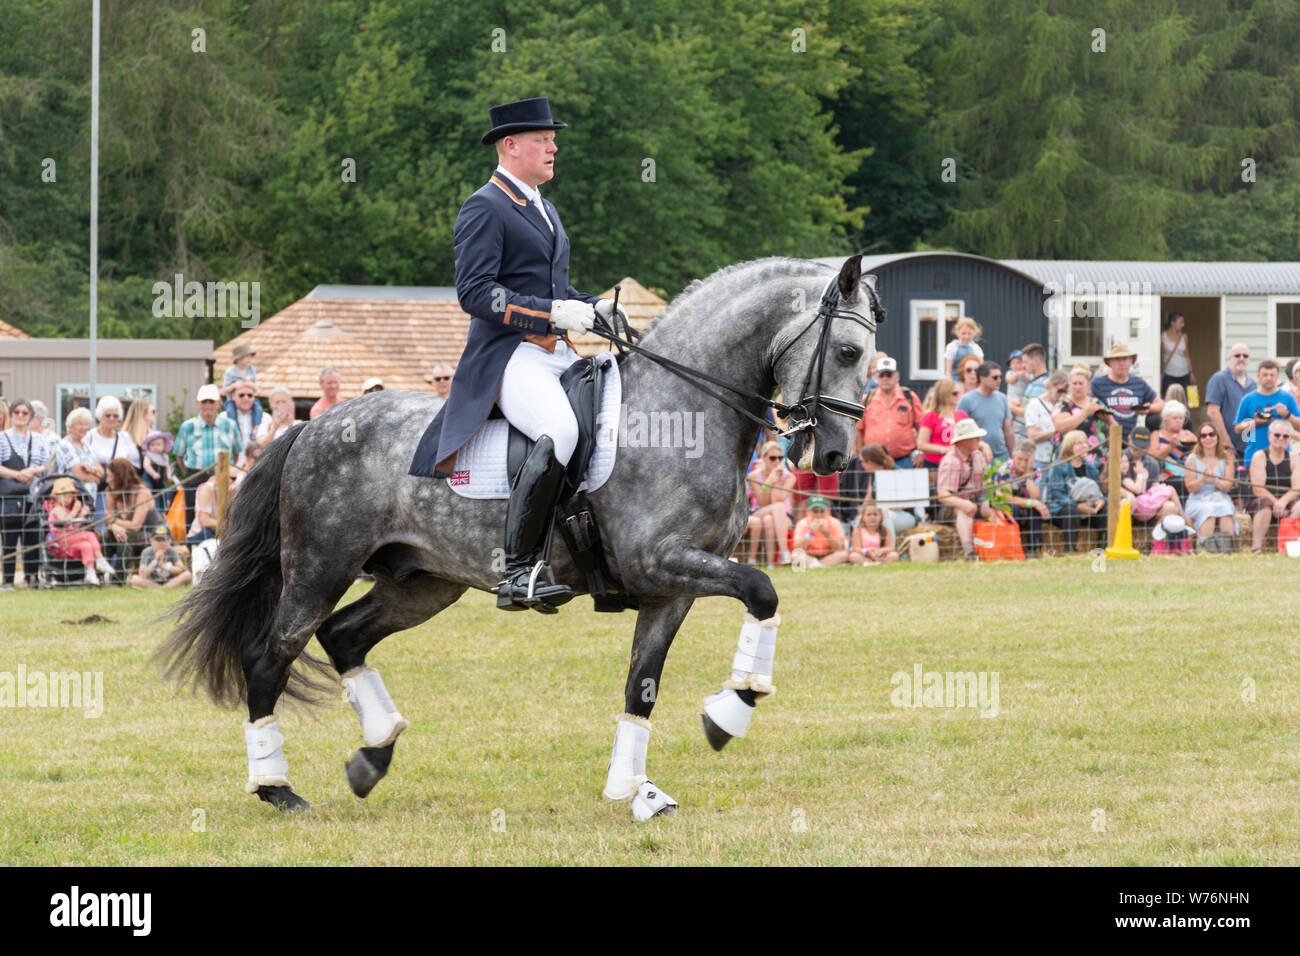 Dressage horse display in the main arena at the Countryfile Live Show 2019, UK Stock Photo